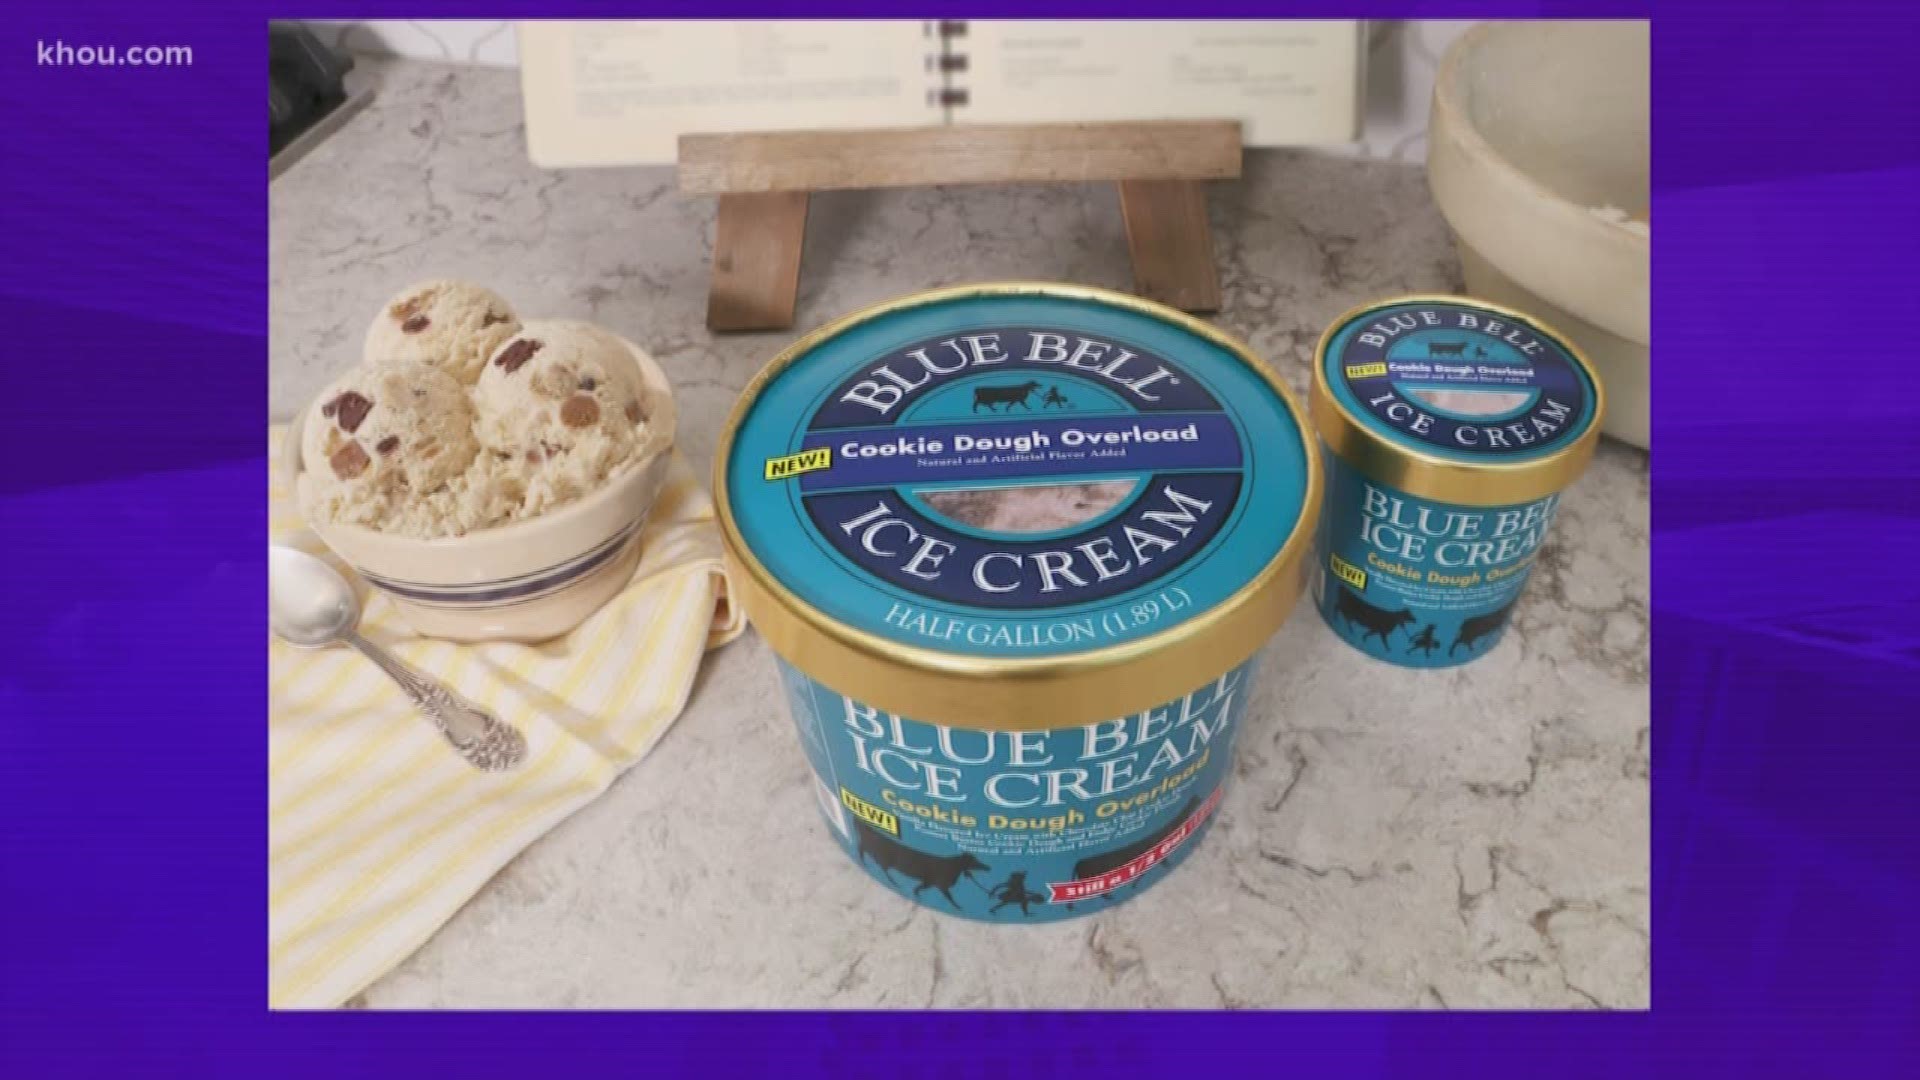 The new Blue Bell flavor, Cookie Dough Overload, is vanilla ice cream with hints of brown sugar, loaded with chocolate chip, peanut better and fudge cookie dough.